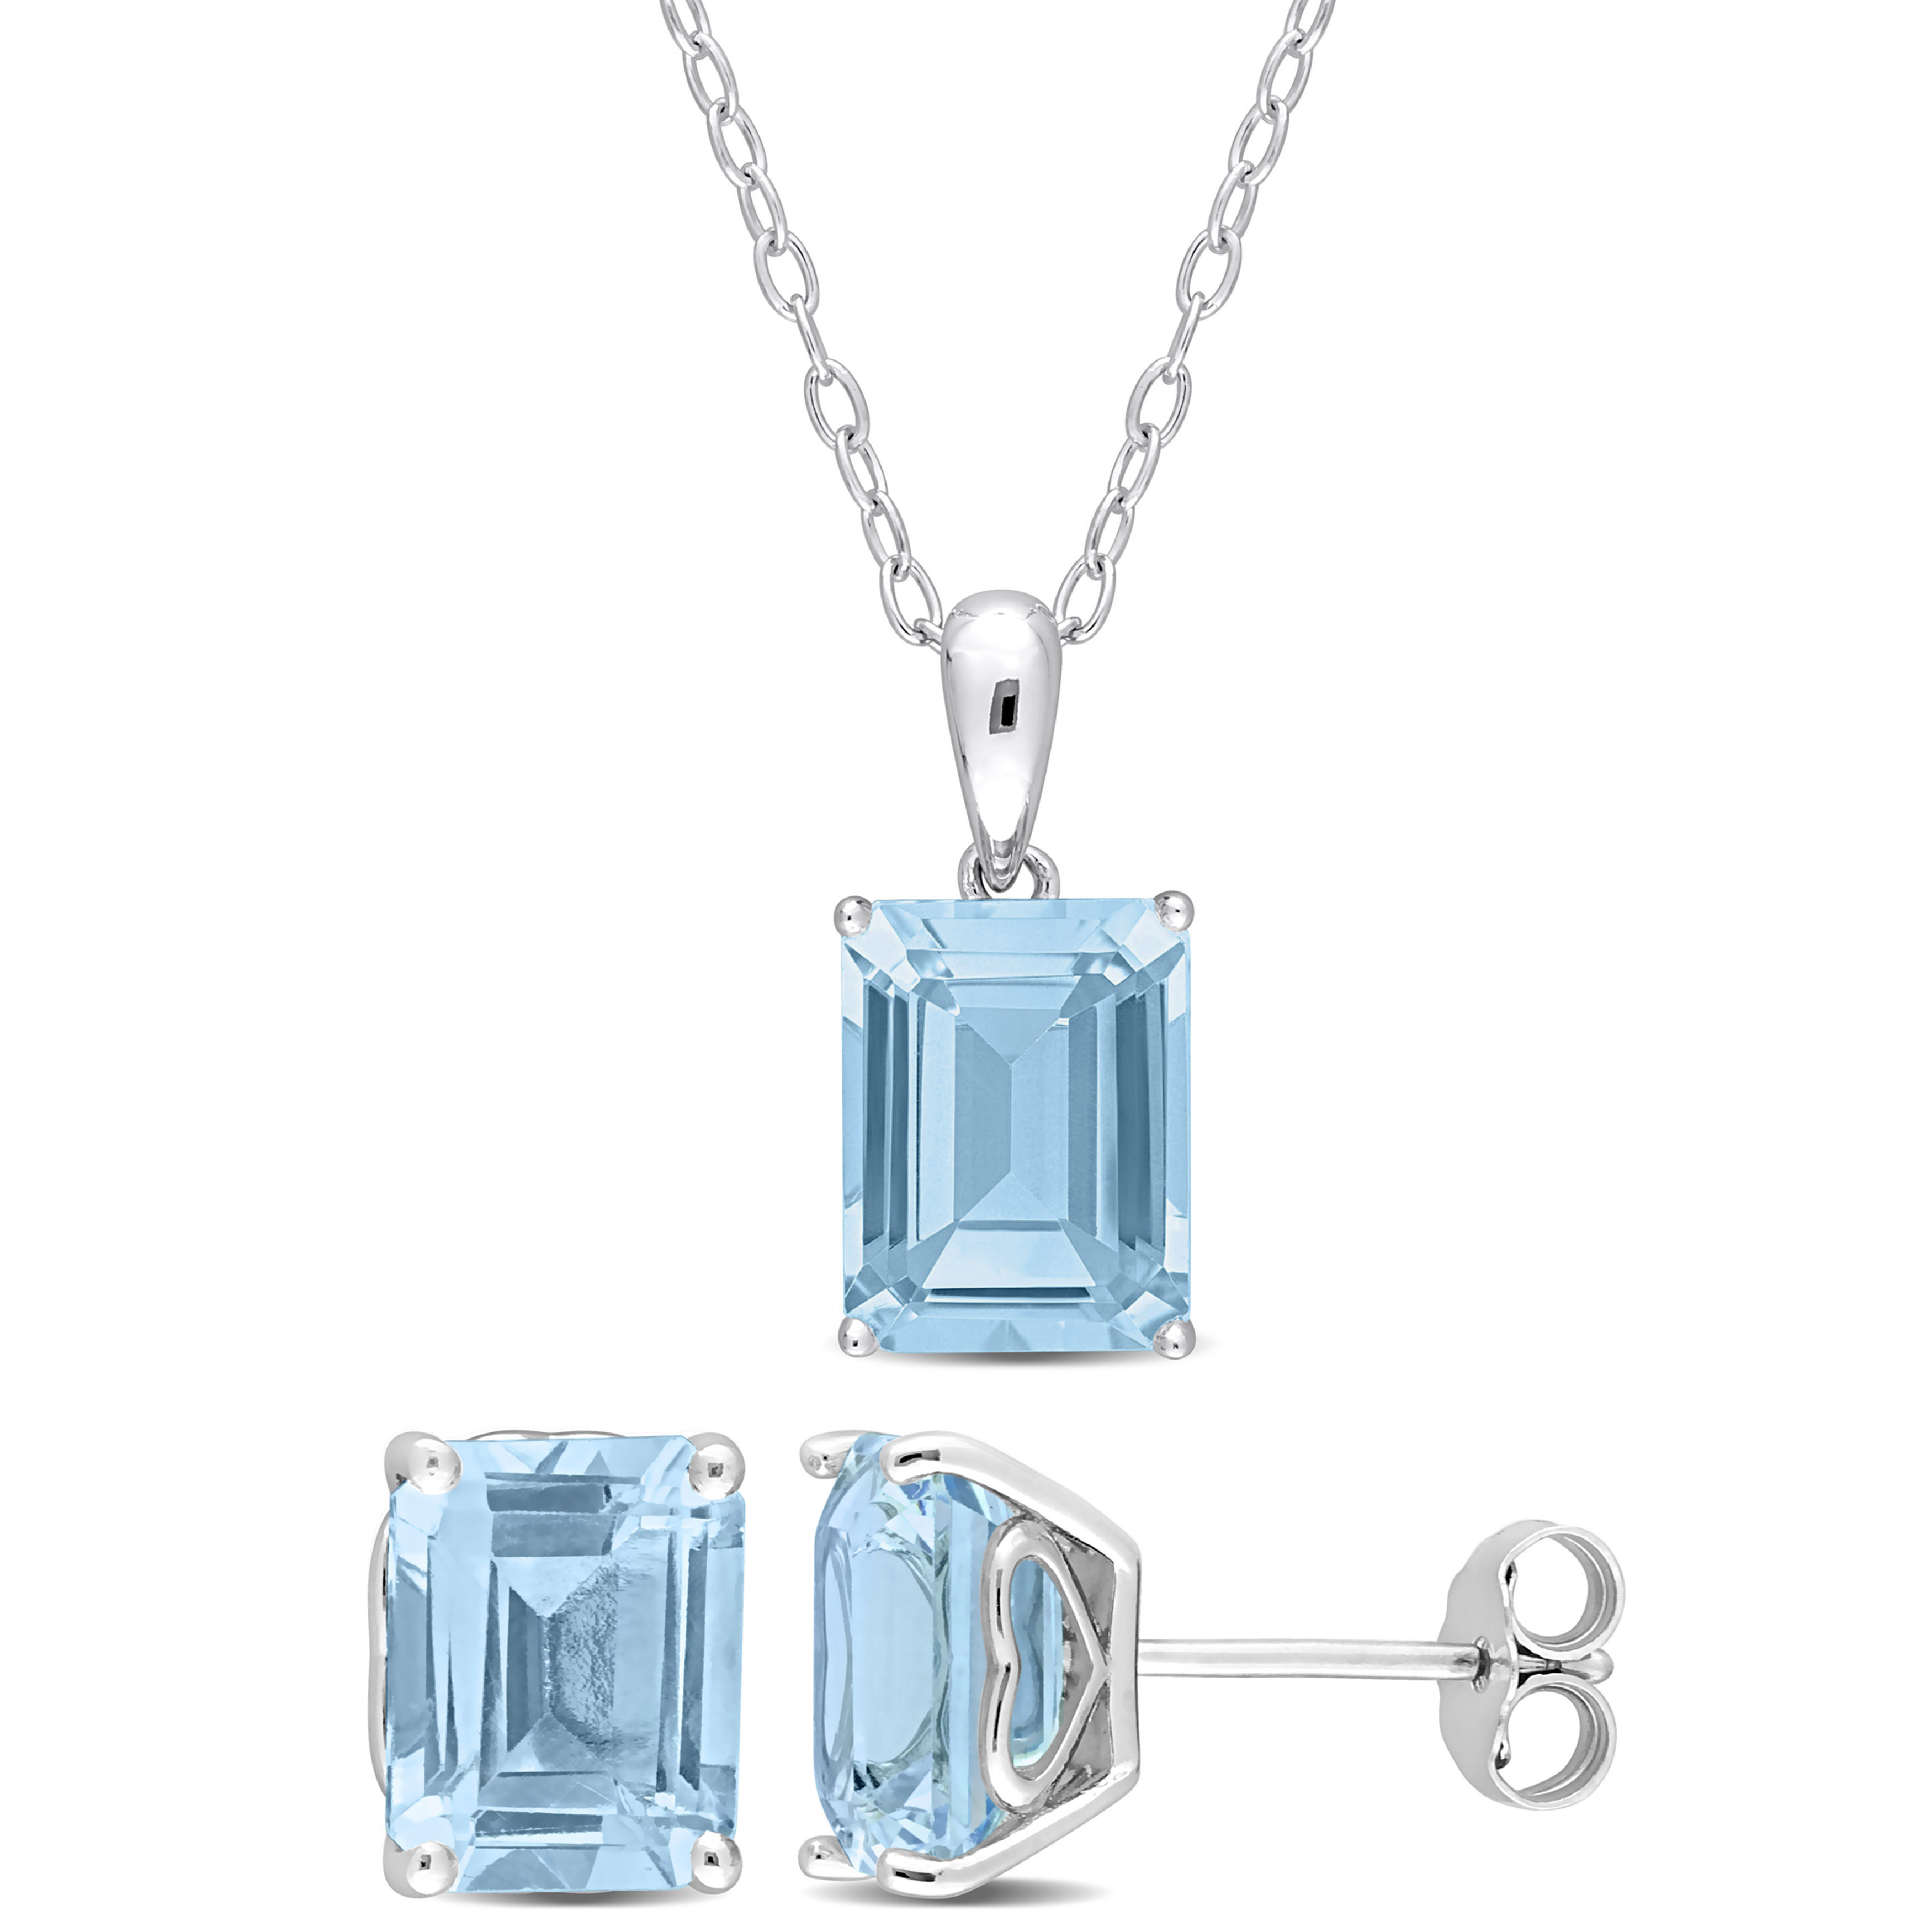 8 4/5 CT TGW Emerald-Cut and Octagon Sky Blue Topaz 2-Piece Solitaire Pendant with Chain and Stud Earrings Set in Sterling Silver